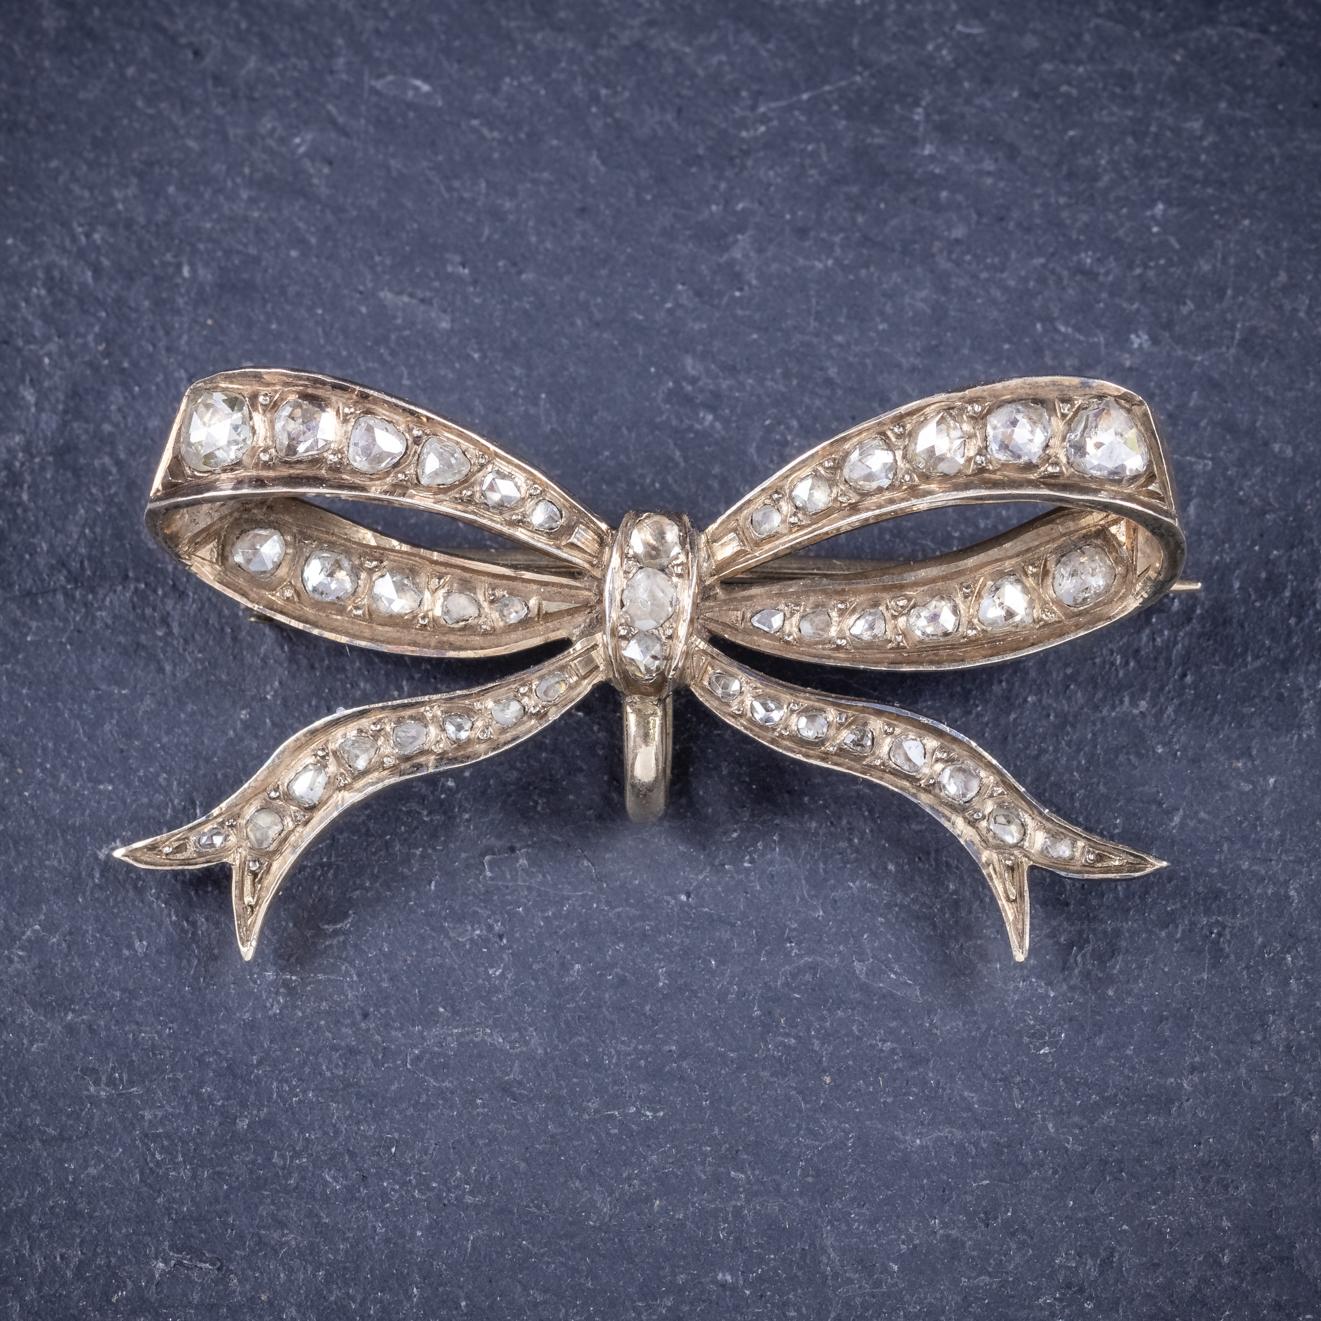 A beautifully made antique Edwardian bow brooch C. 1910, decorated in approx. 1.70ct of Rose cut Diamonds which sparkle throughout the piece. 

The brooch displays beautiful workmanship throughout and fashioned in 18ct Yellow Gold with a sturdy pin